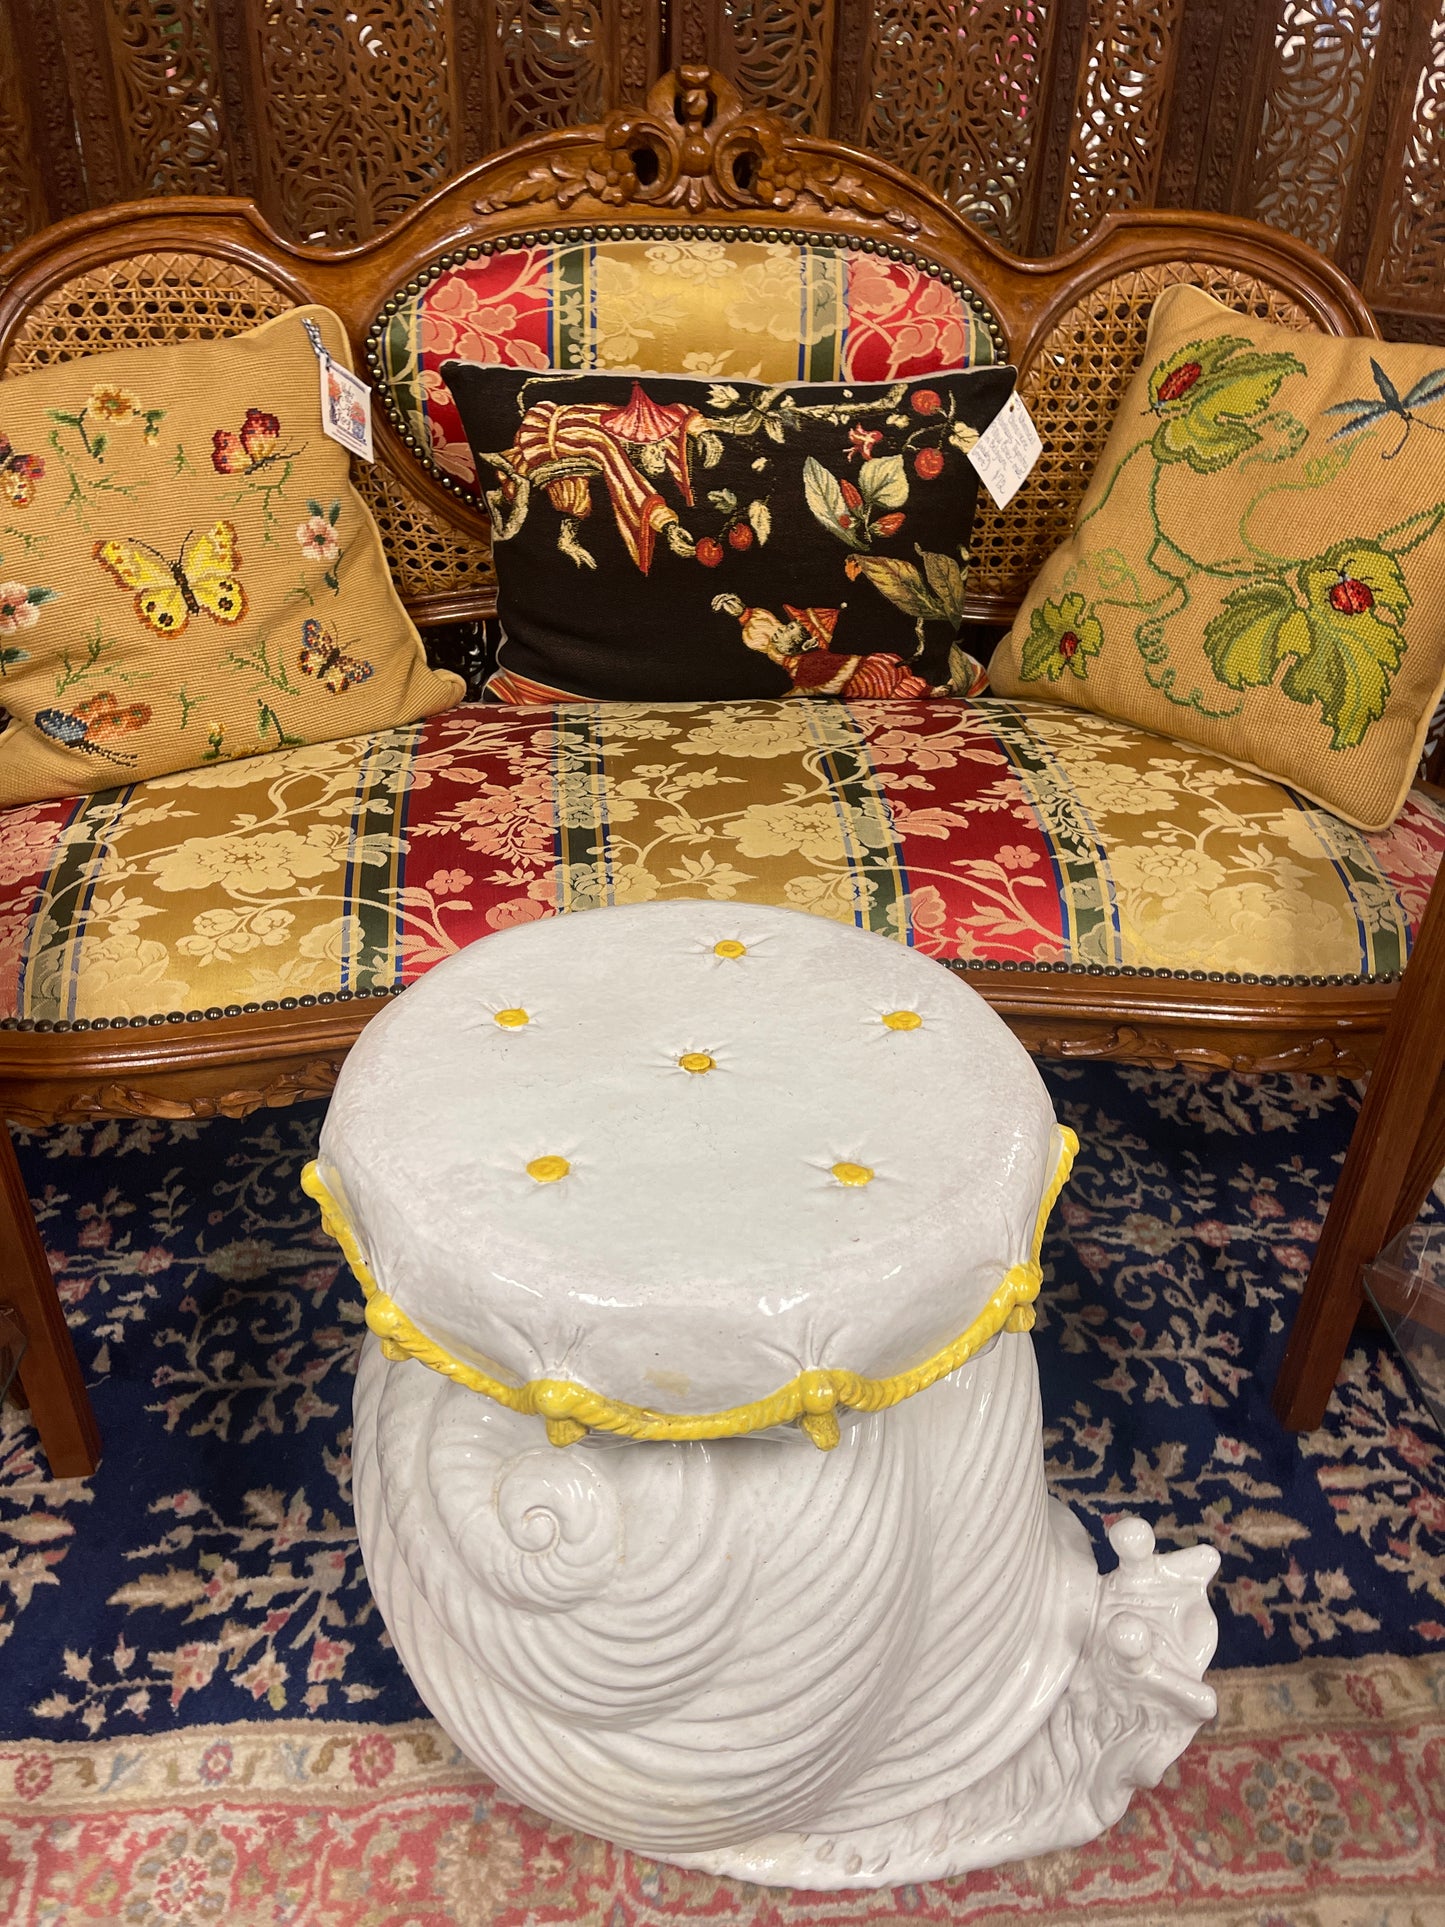 Italian Snail Side Table/Garden Stool with a Tufted and Tasseled Pillow, Made in Italy, Vintage